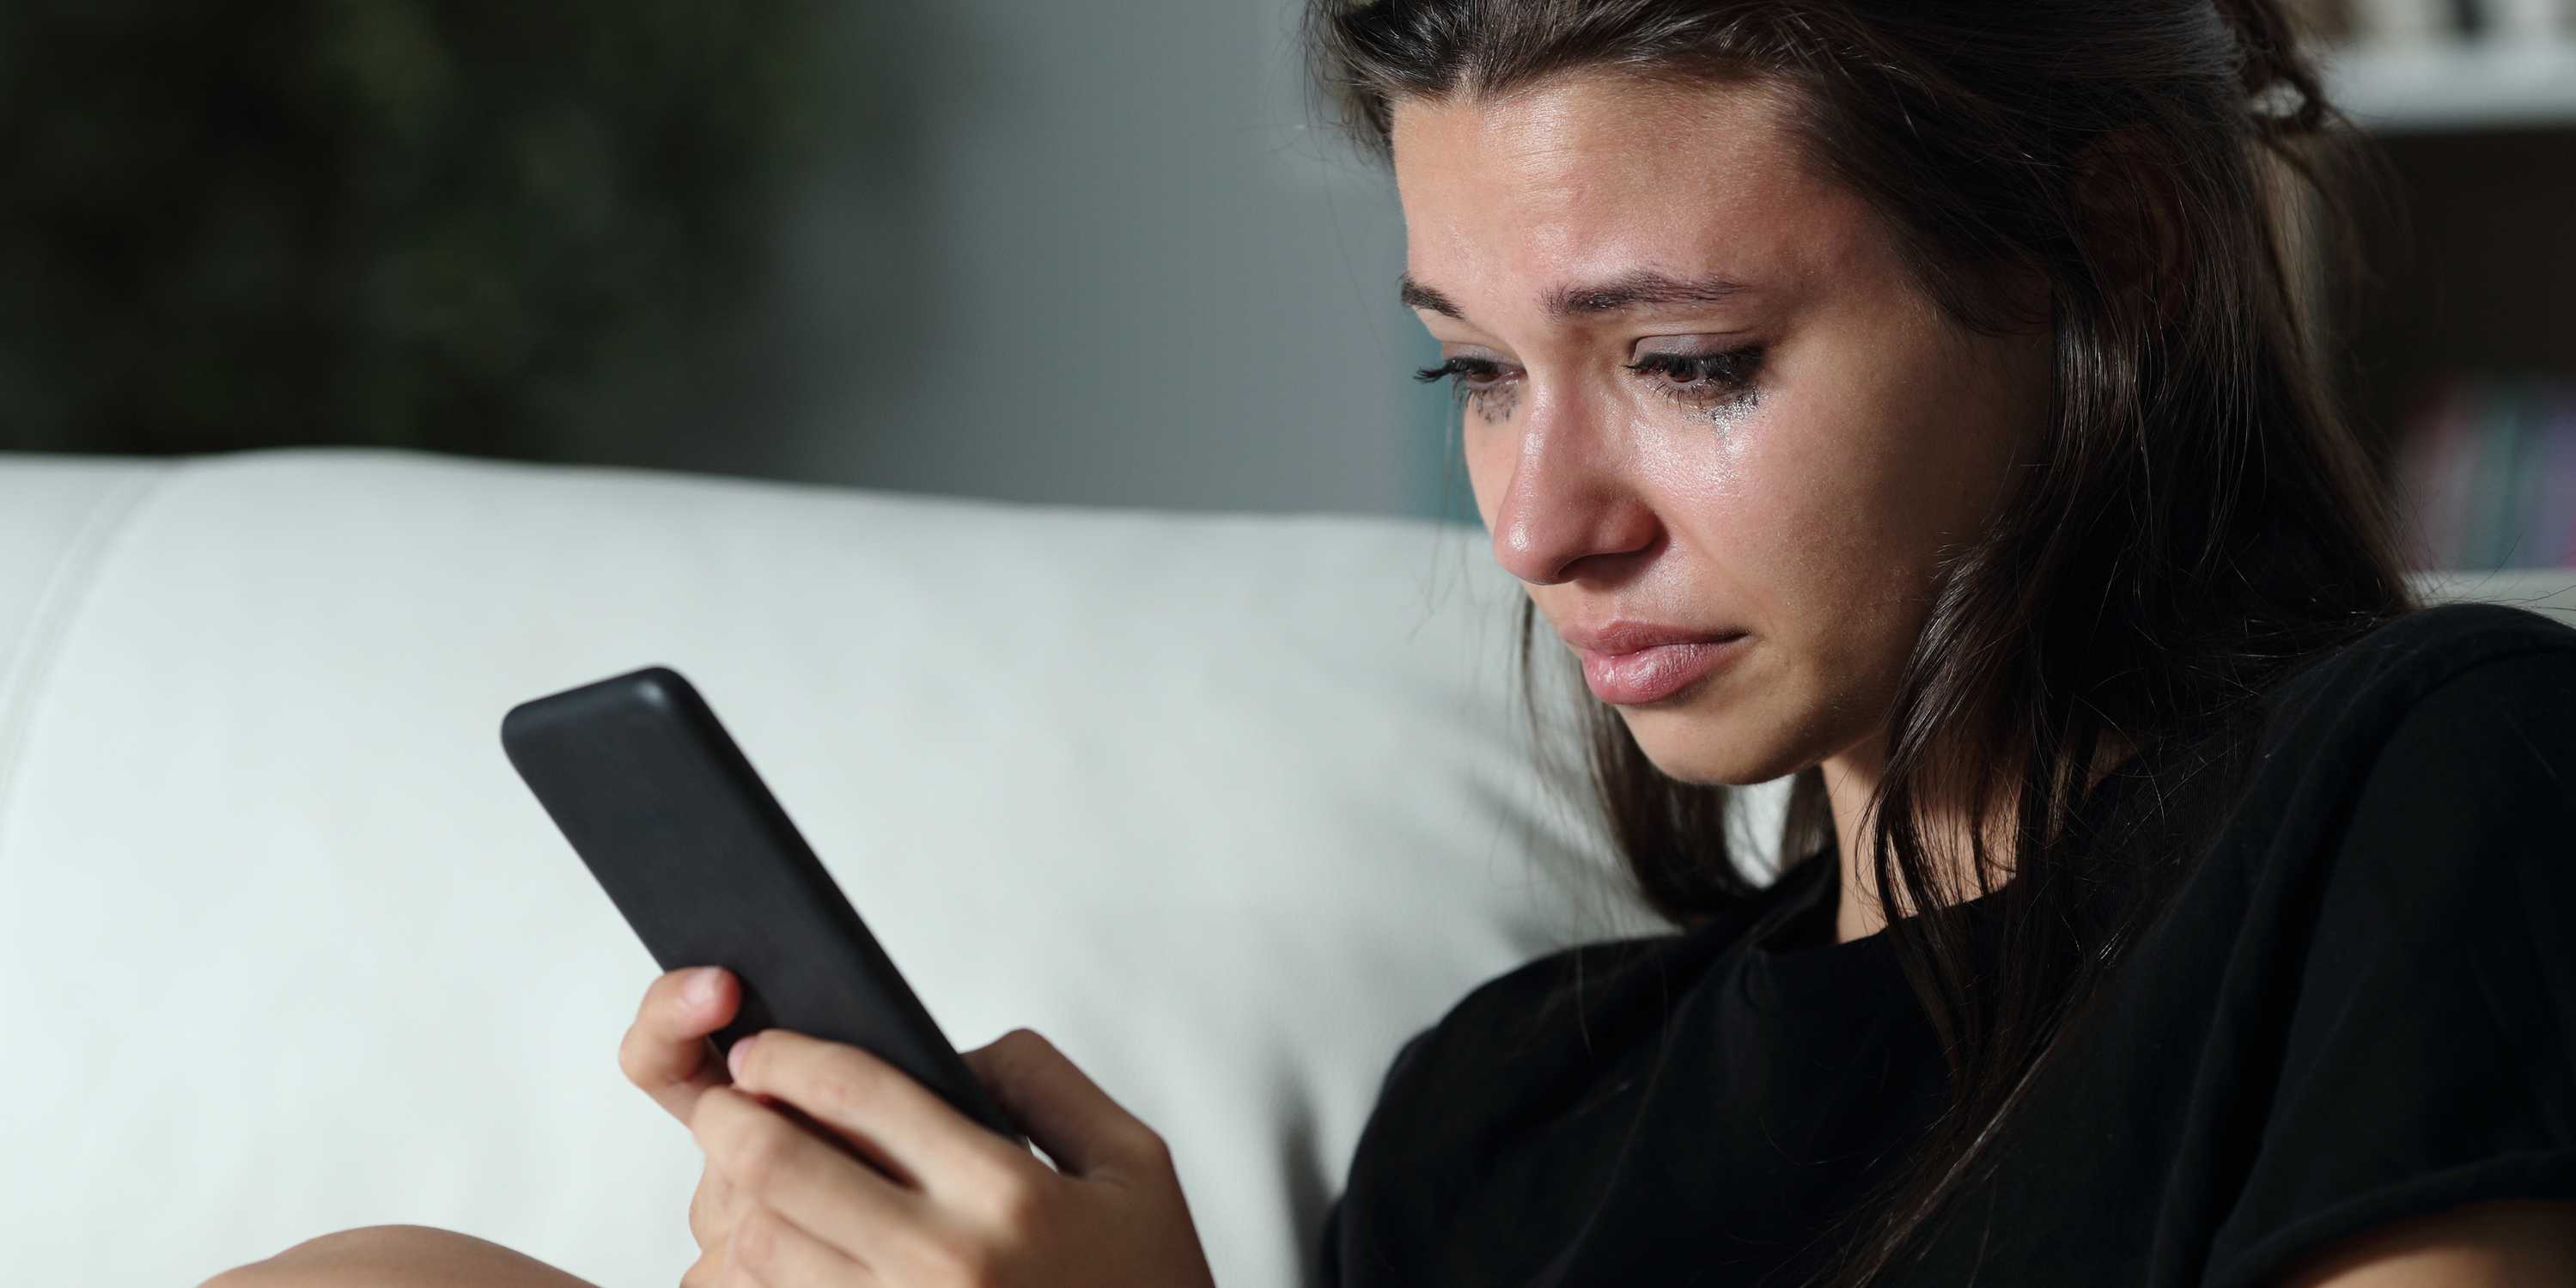 teen girl reading cyberbully messages on phone